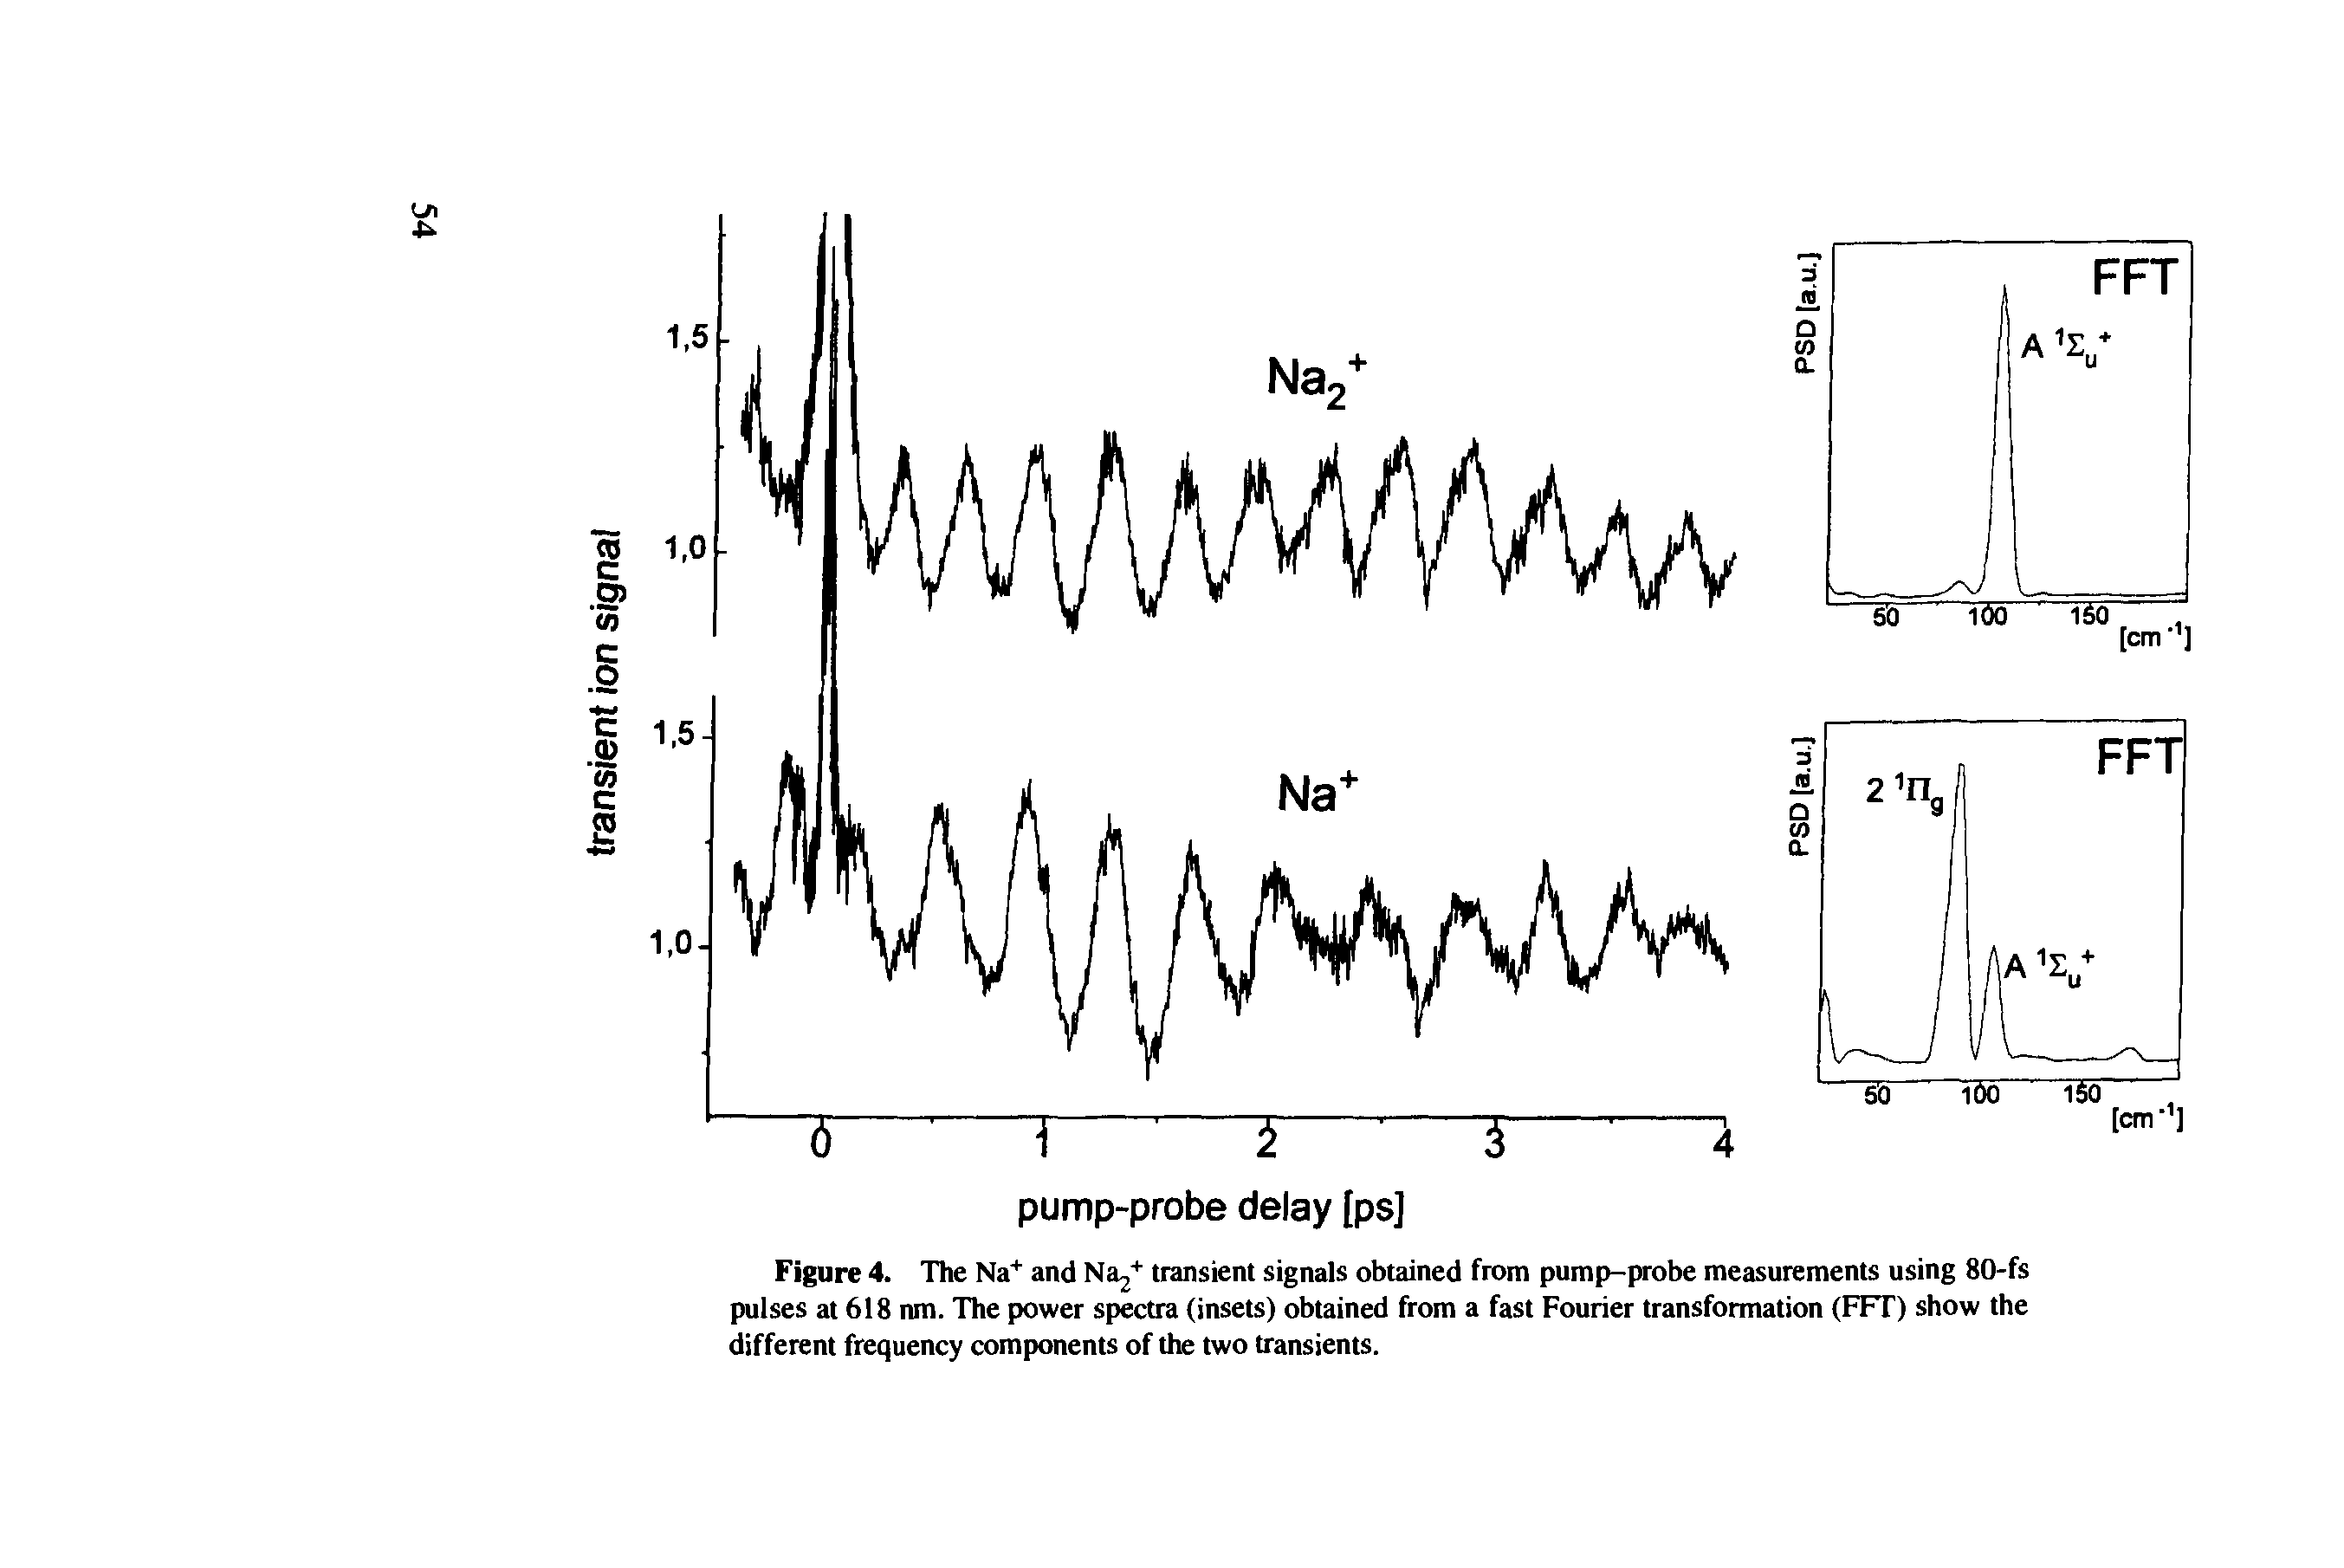 Figure 4. The Na+ and Na2+ transient signals obtained from pump-probe measurements using 80-fs pulses at 618 nm. The power spectra (insets) obtained from a fast Fourier transformation (FFT) show the different frequency components of the two transients.